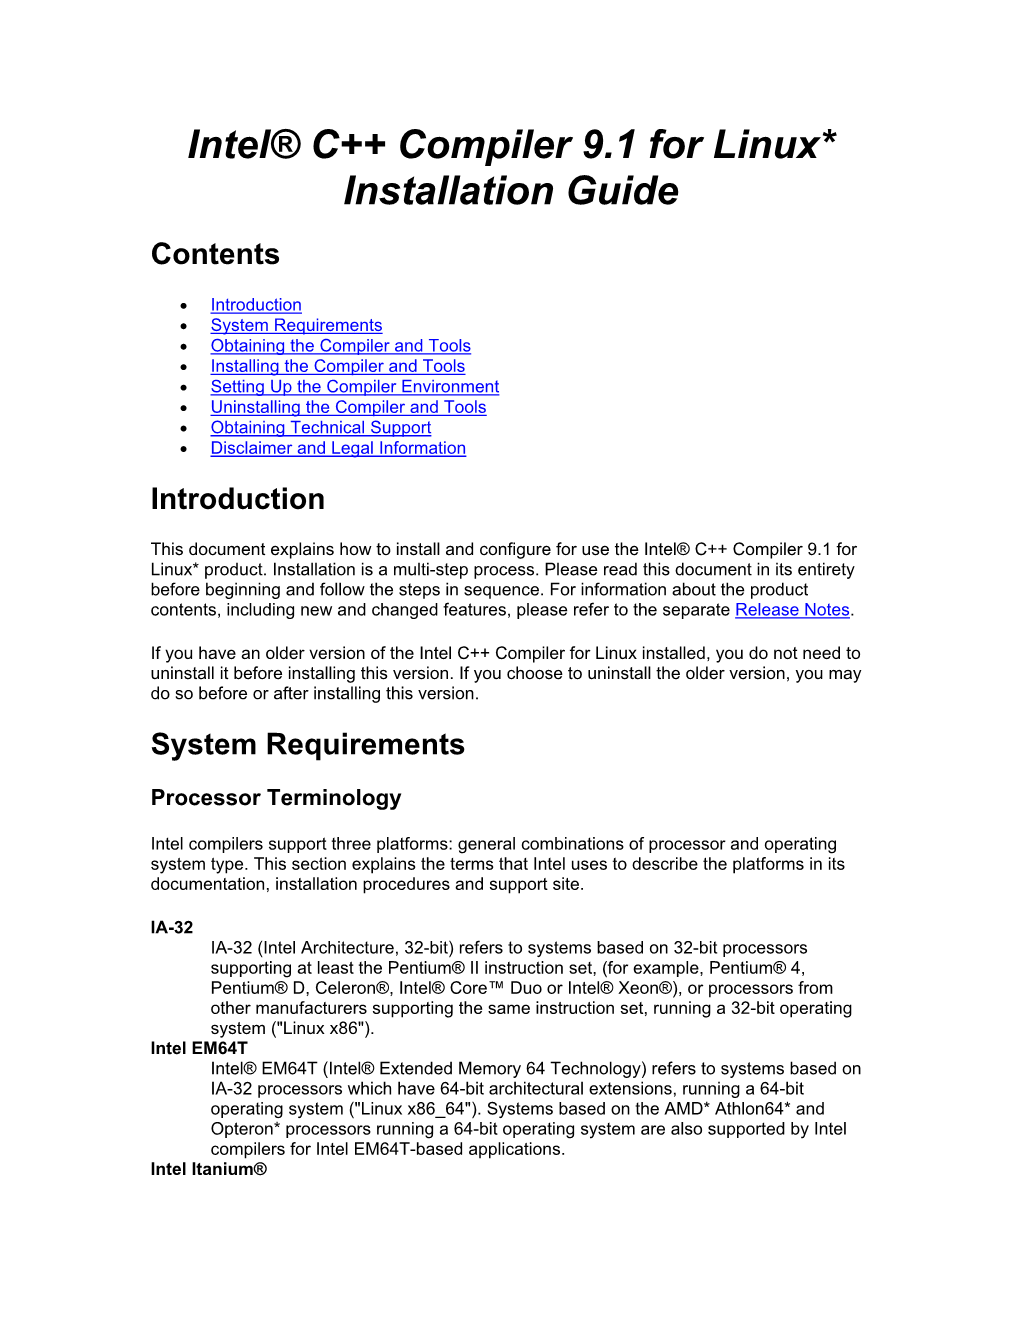 Intel® C++ Compiler 9.1 for Linux* Installation Guide Contents